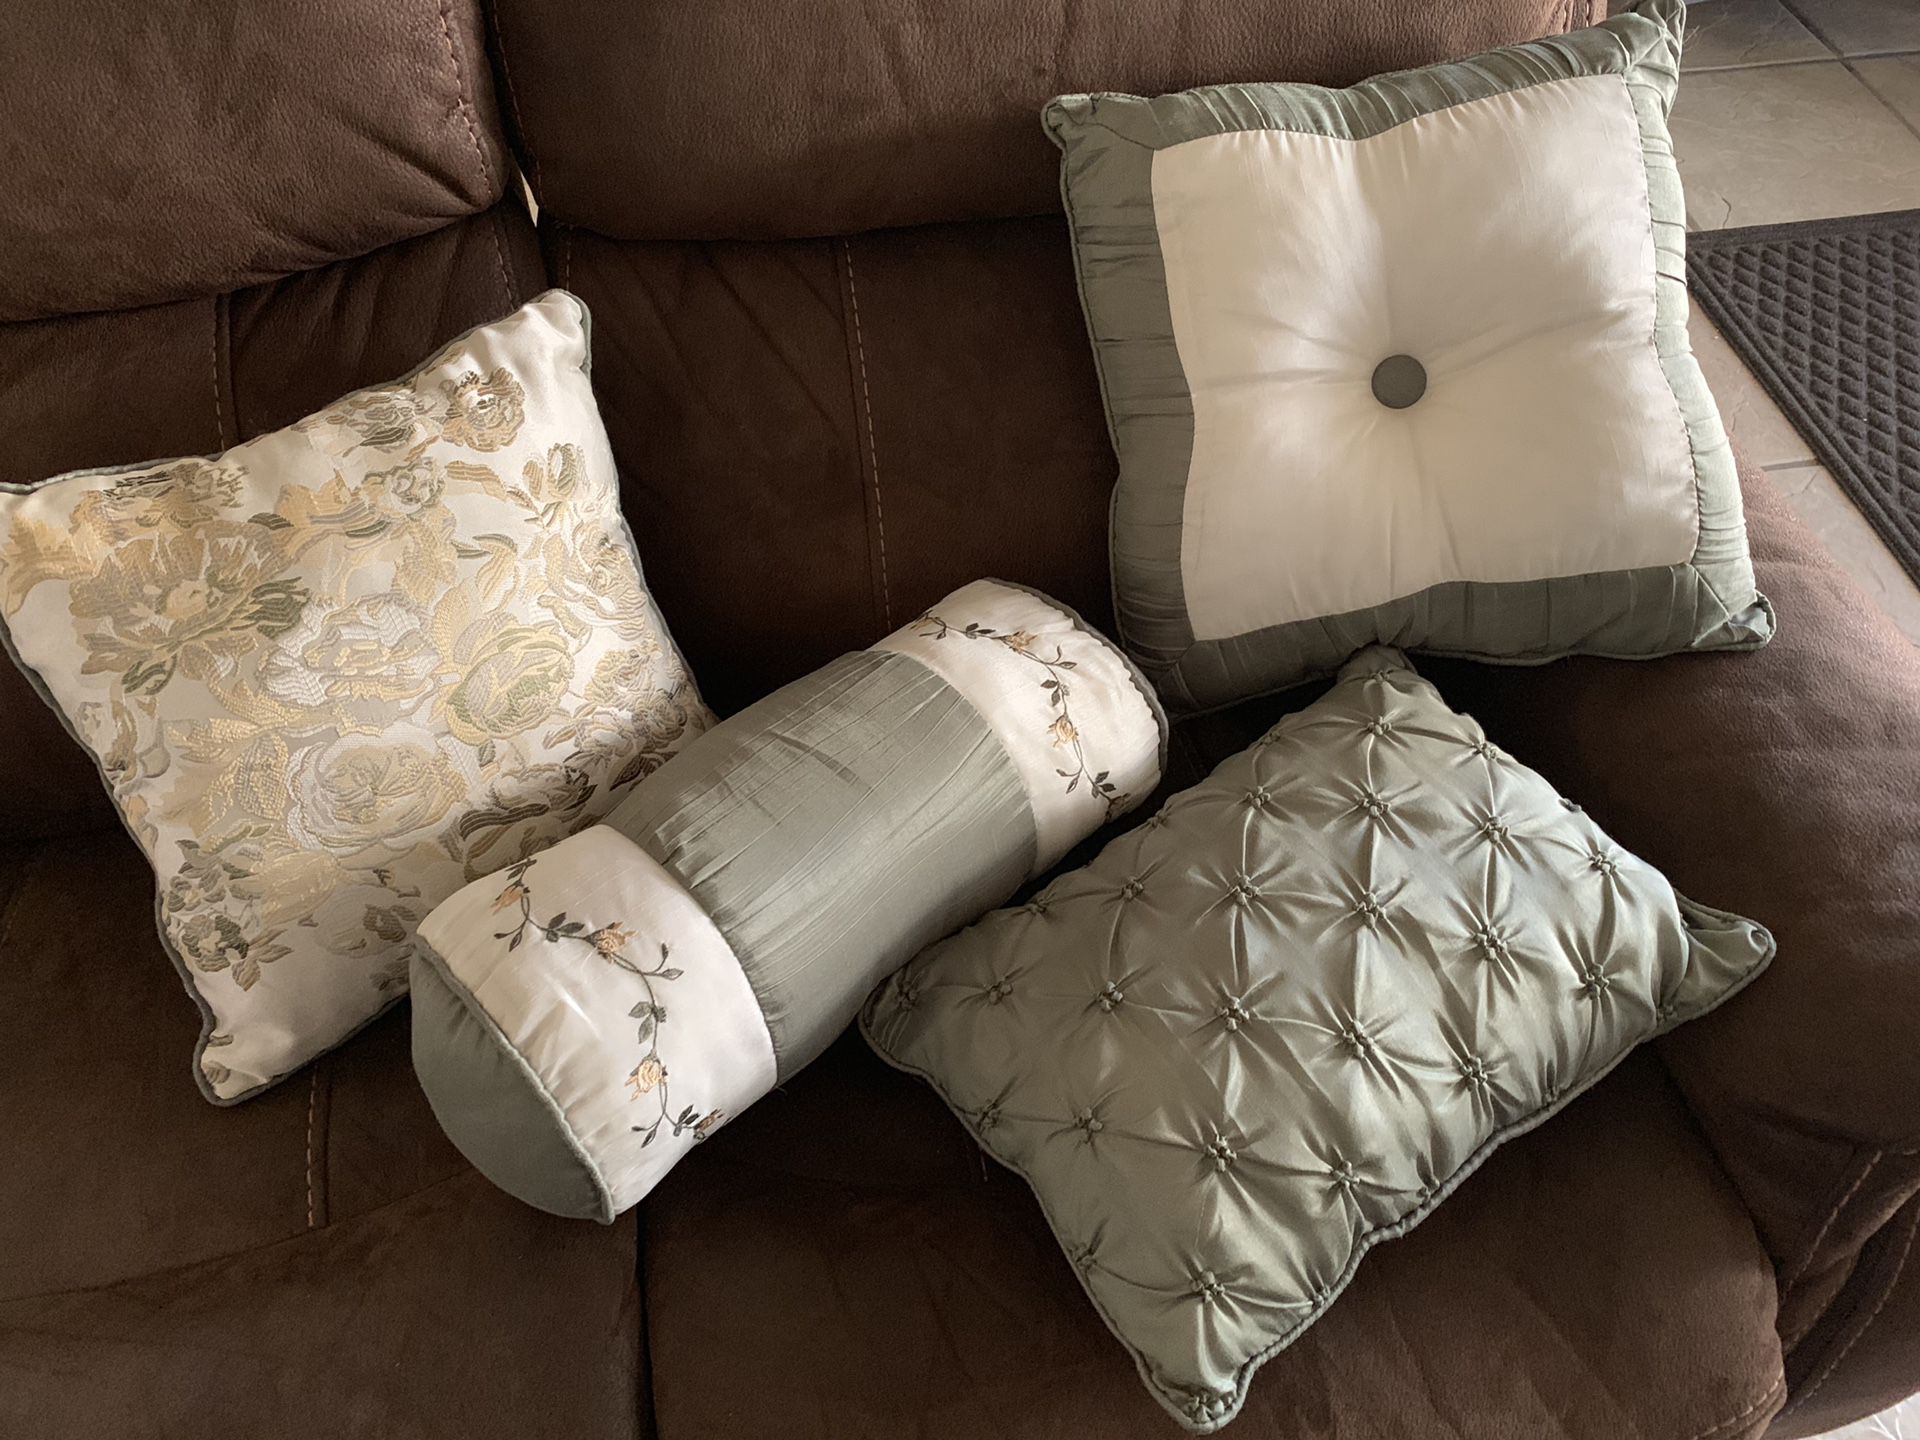 Tan and Olive decoration pillows